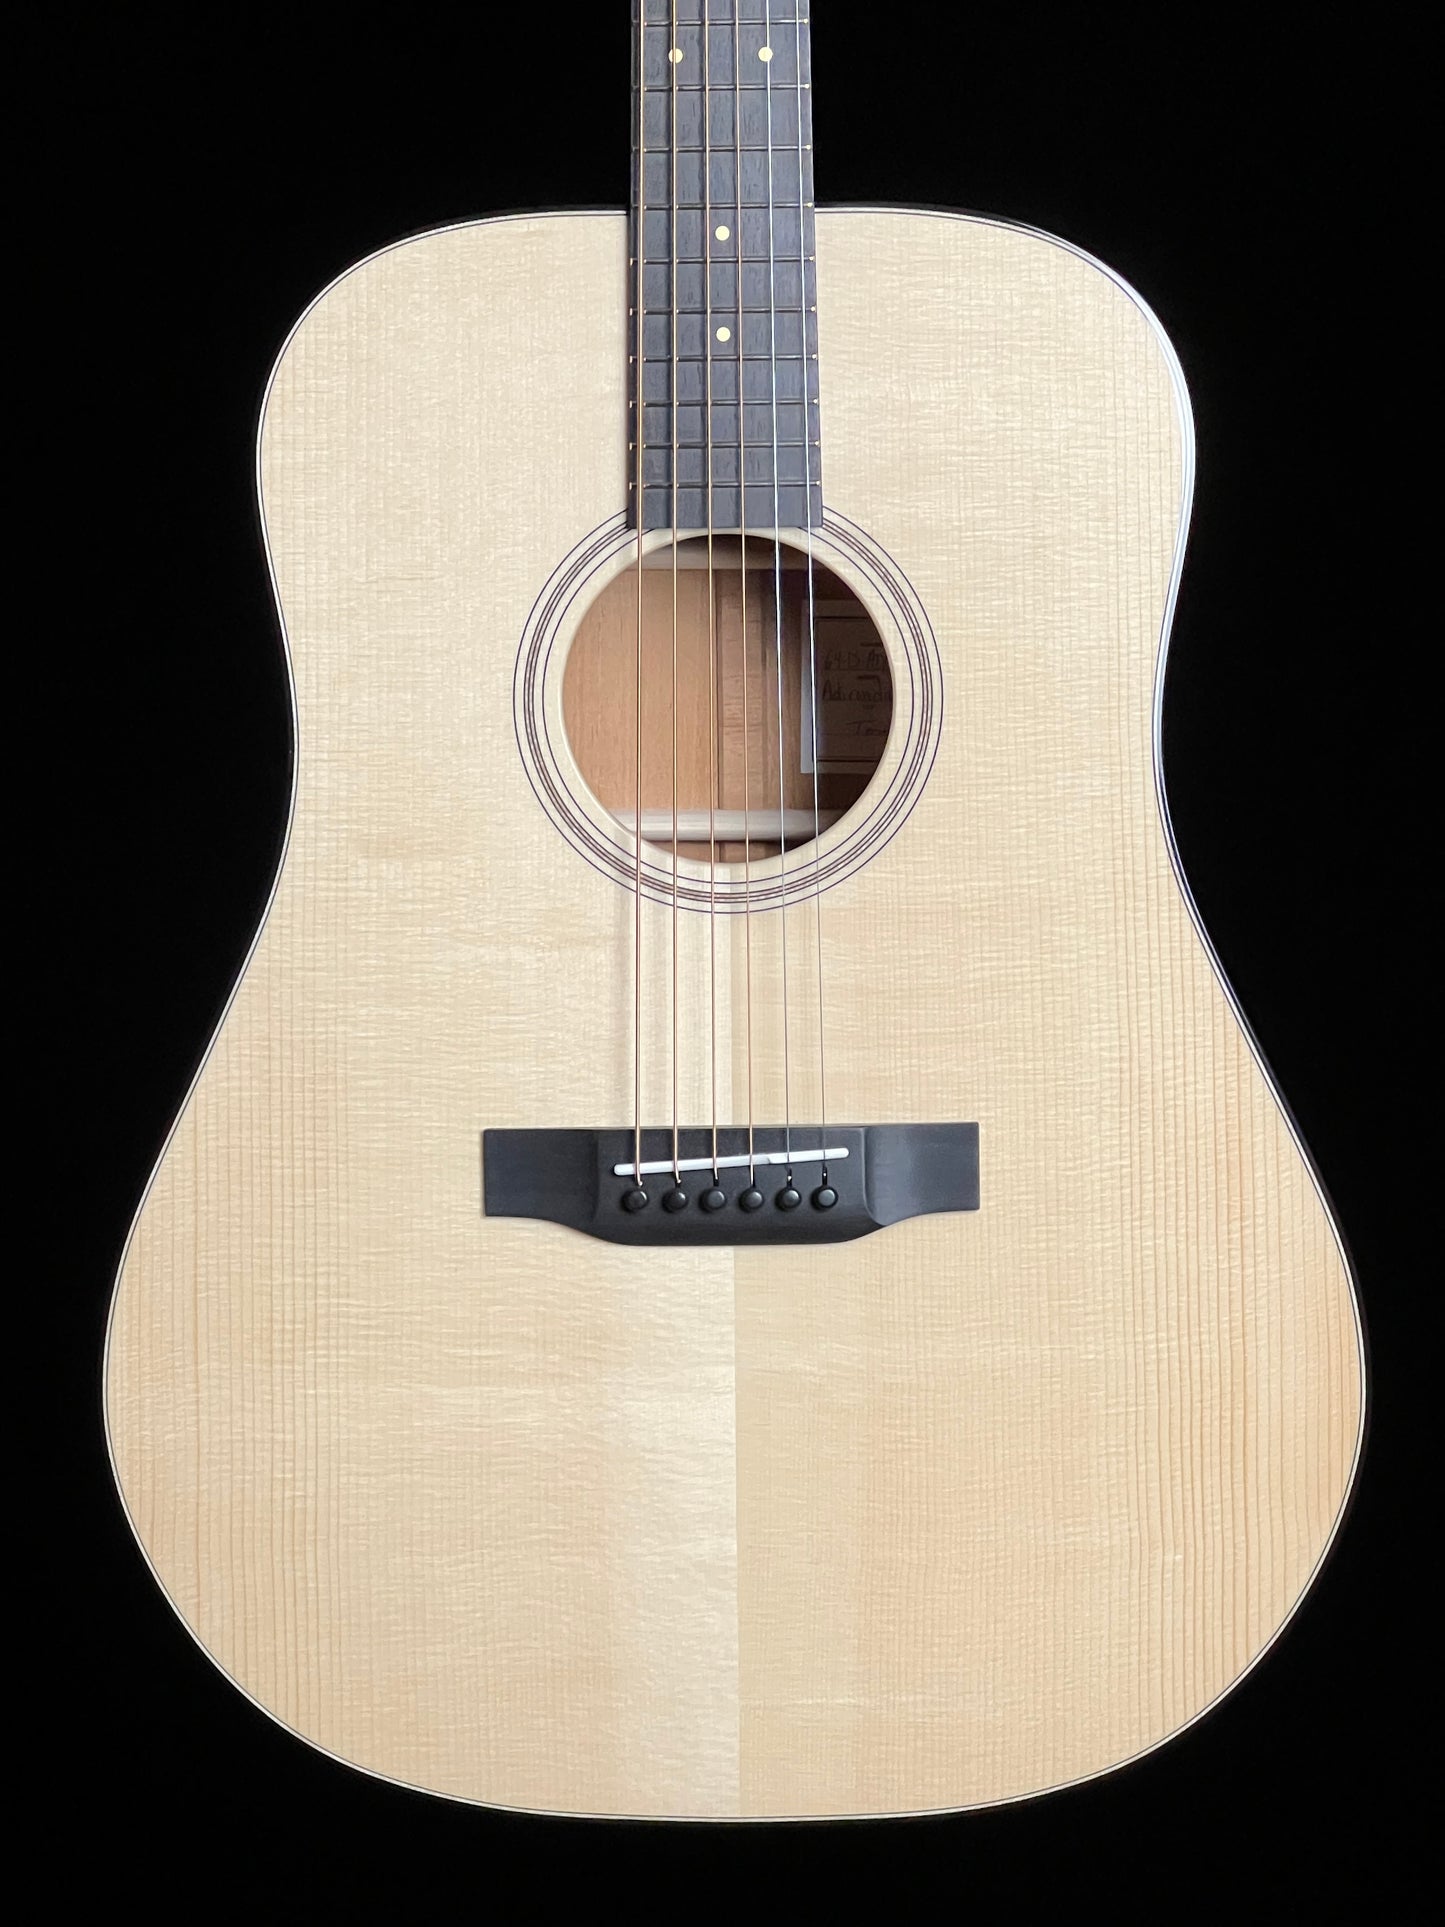 Bedell 1964 Series Special Edition Dreadnought Adirondack Spruce/Honduran Mahogany Acoustic Guitar with K&K Pure Mini- New